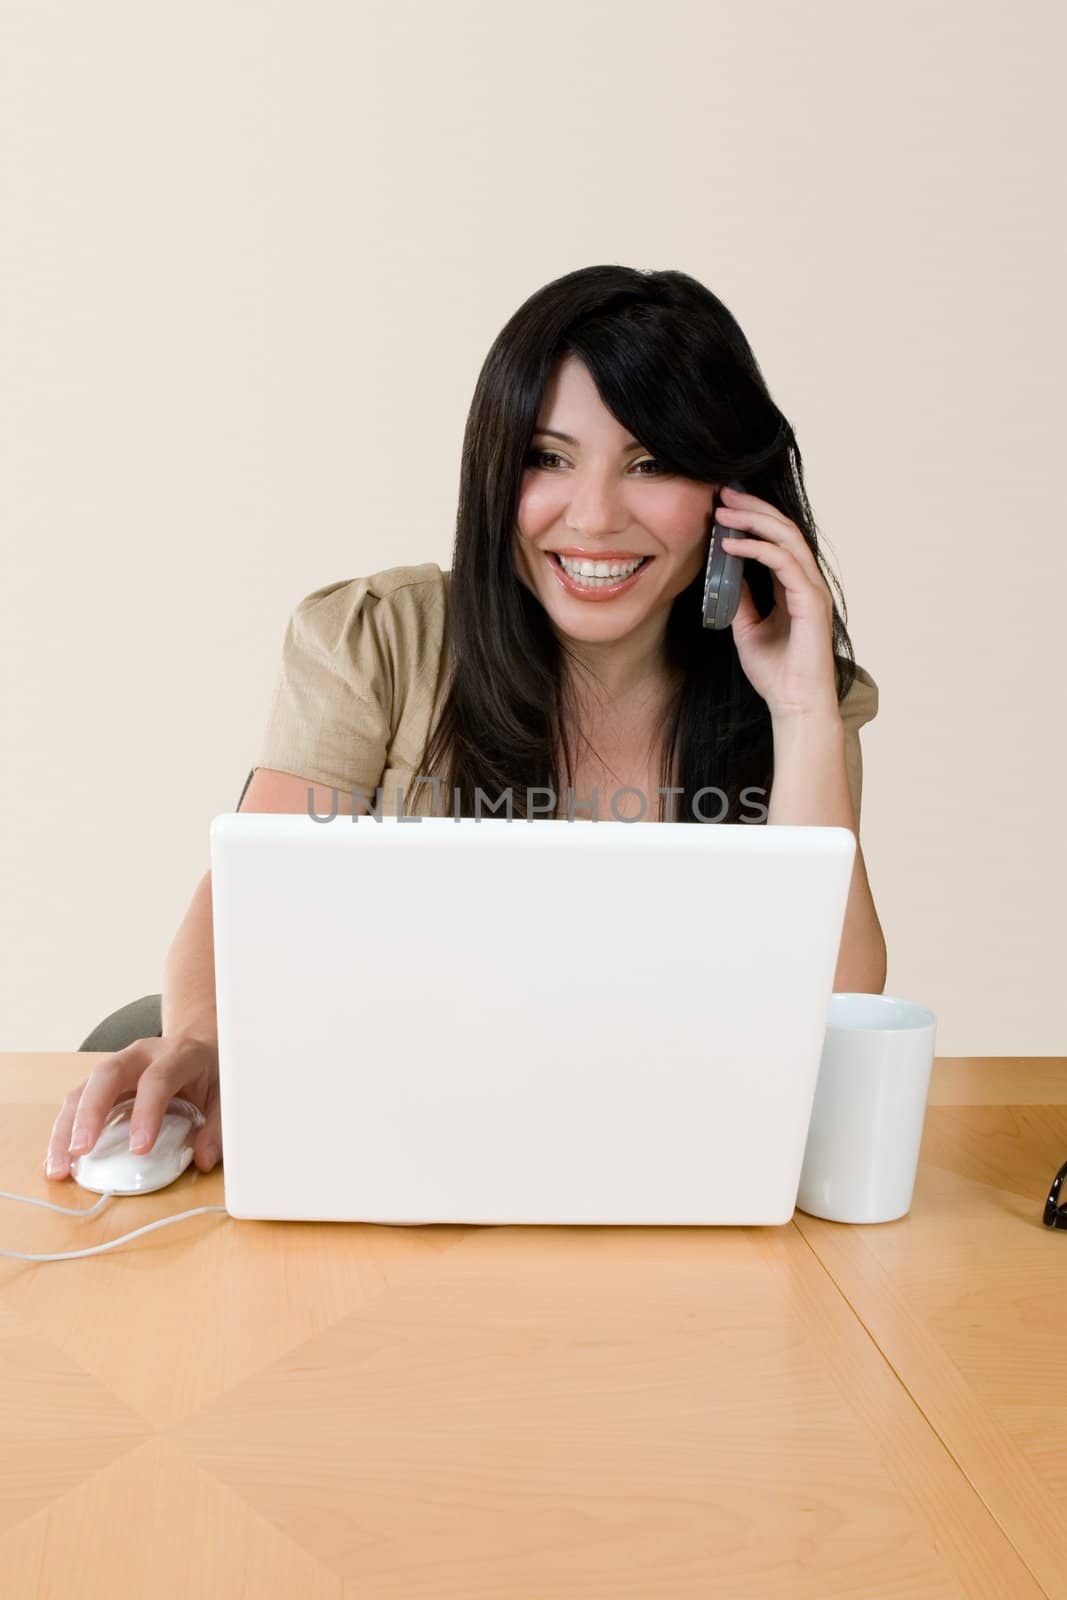 A woman at work using the telephone.